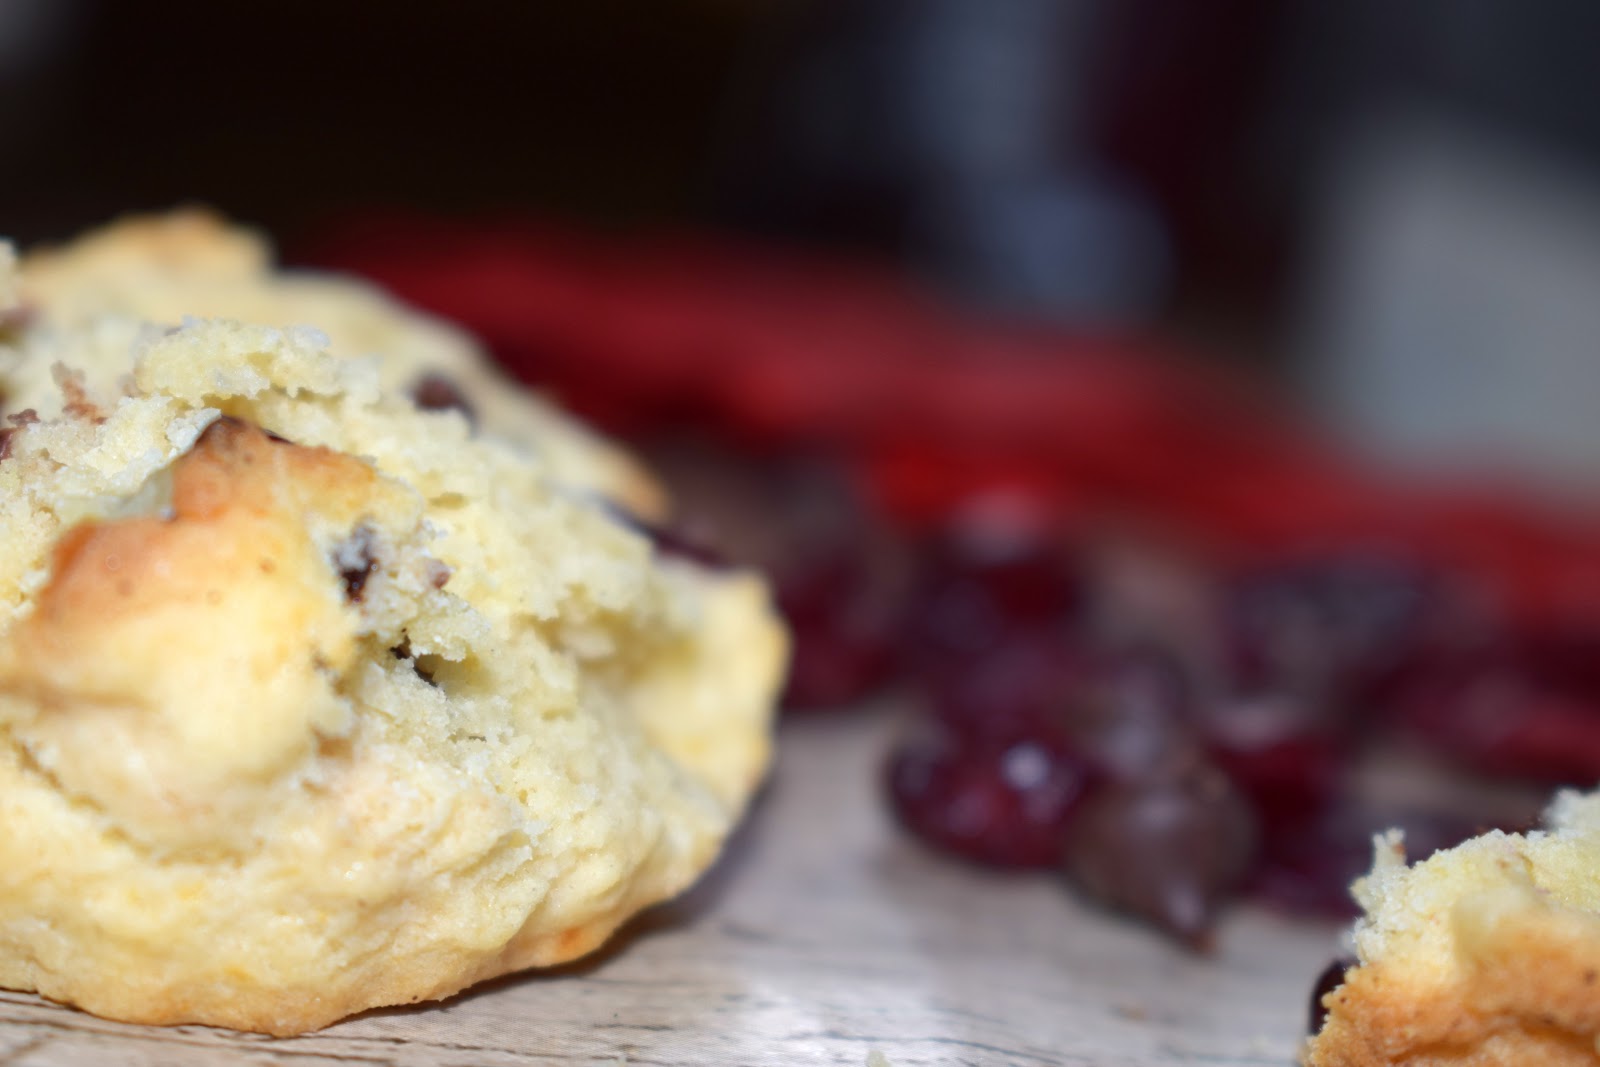 Cranberry and chocolate chip scones